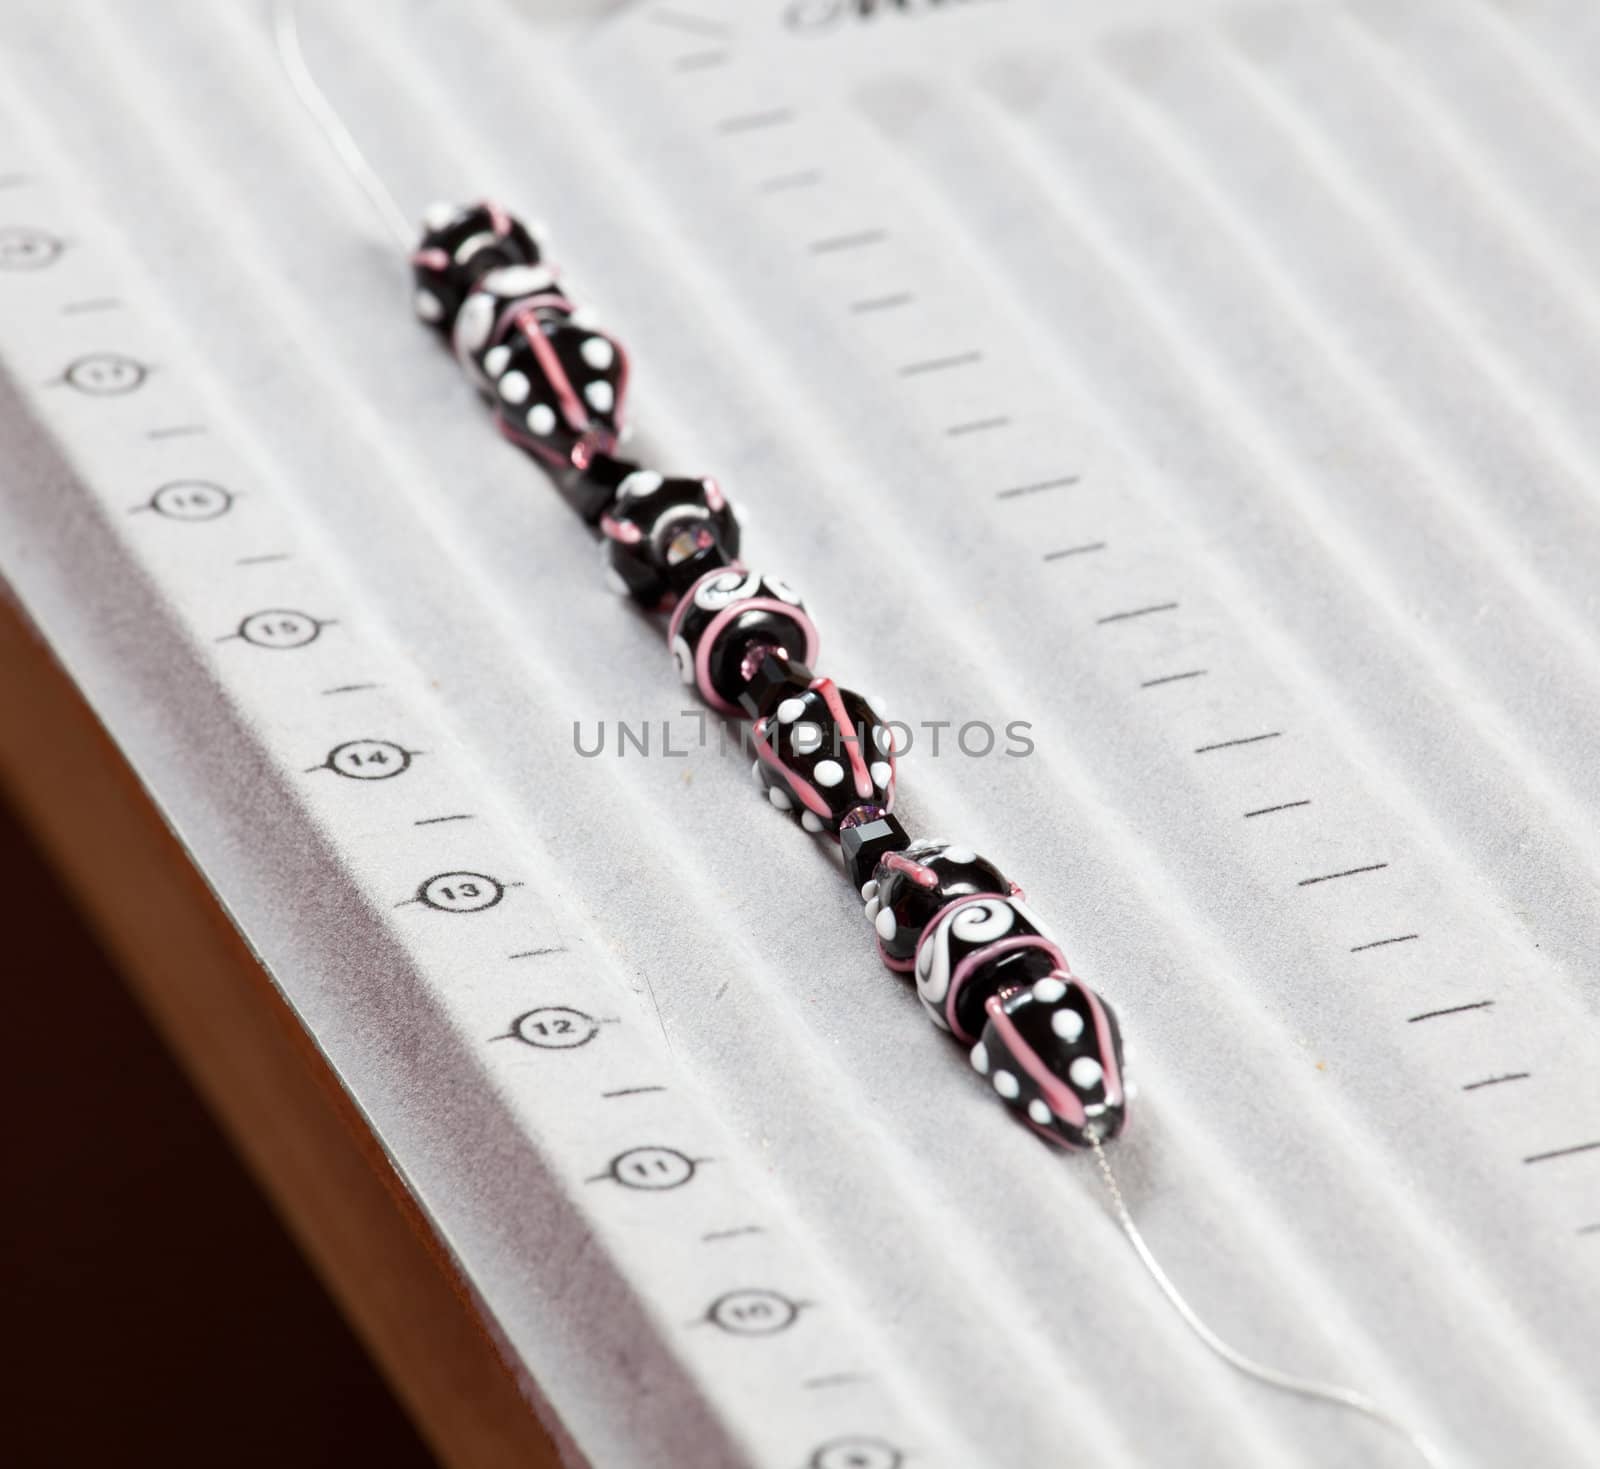 Making handmade jewelry with black, white and pink beads being threaded on a string